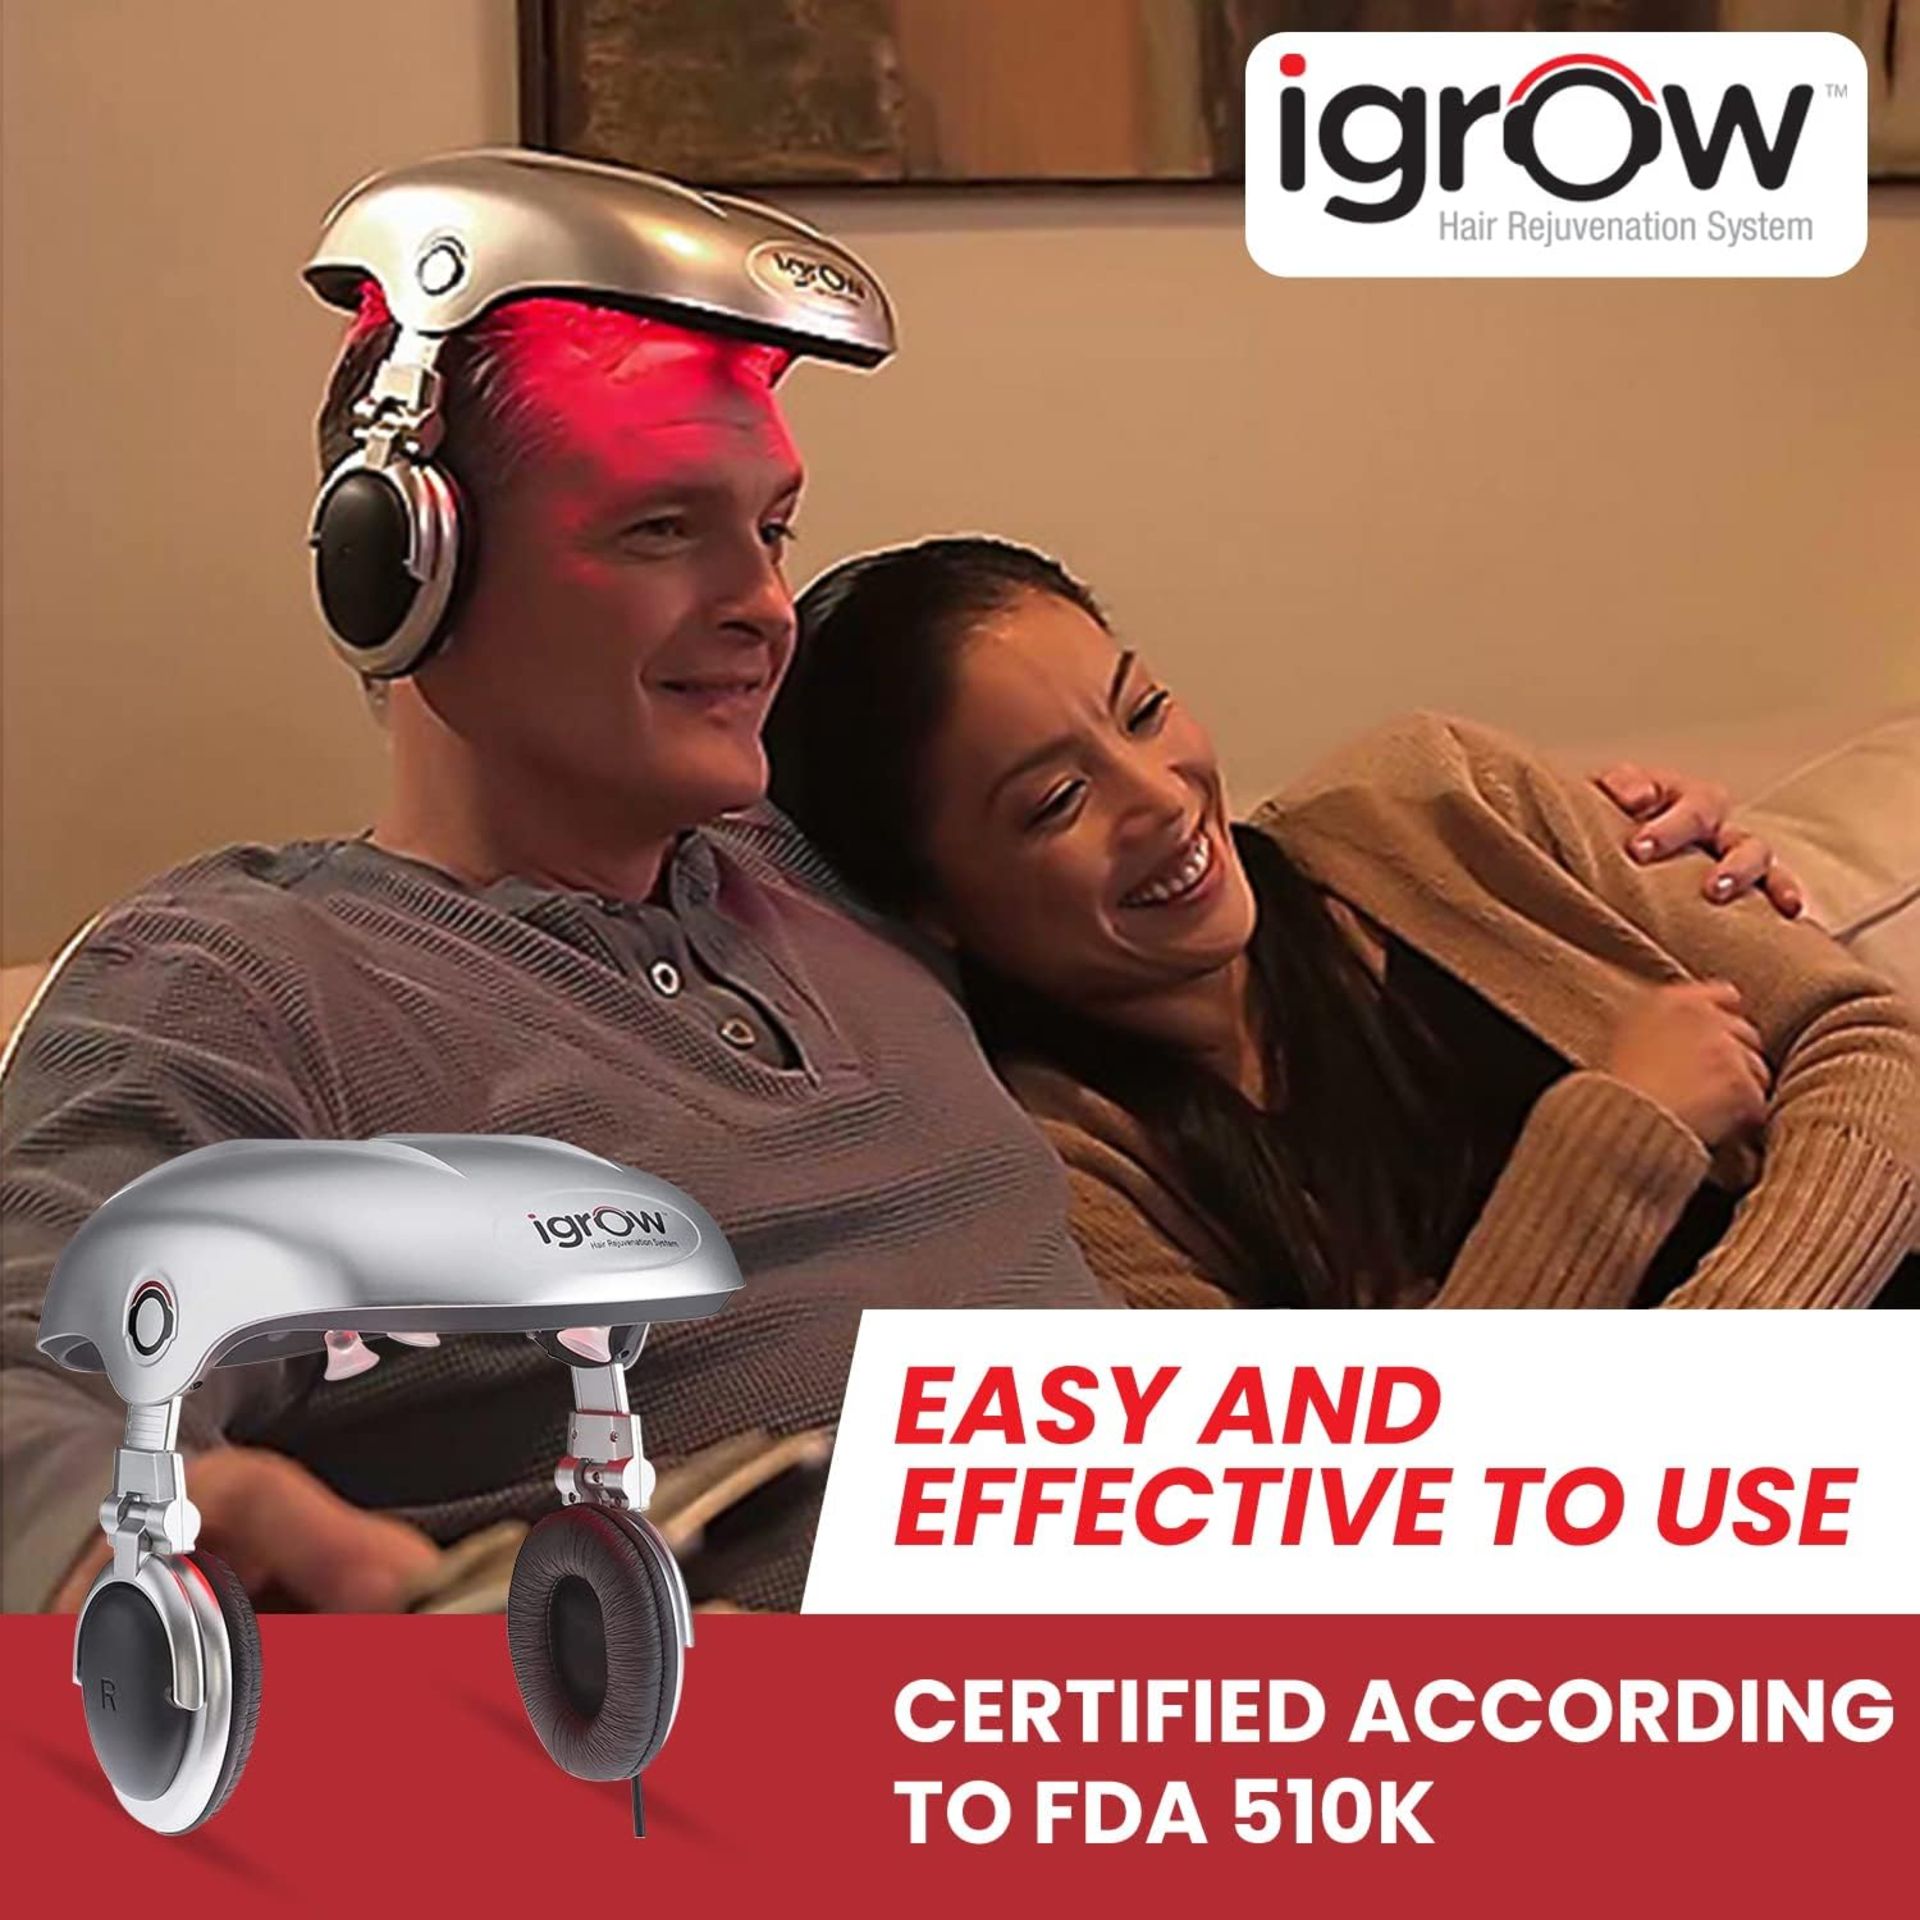 Brand New iGrow Professional Laser Hair Growth System - FDA Cleared Laser Cap Hair Growth for - Image 5 of 5